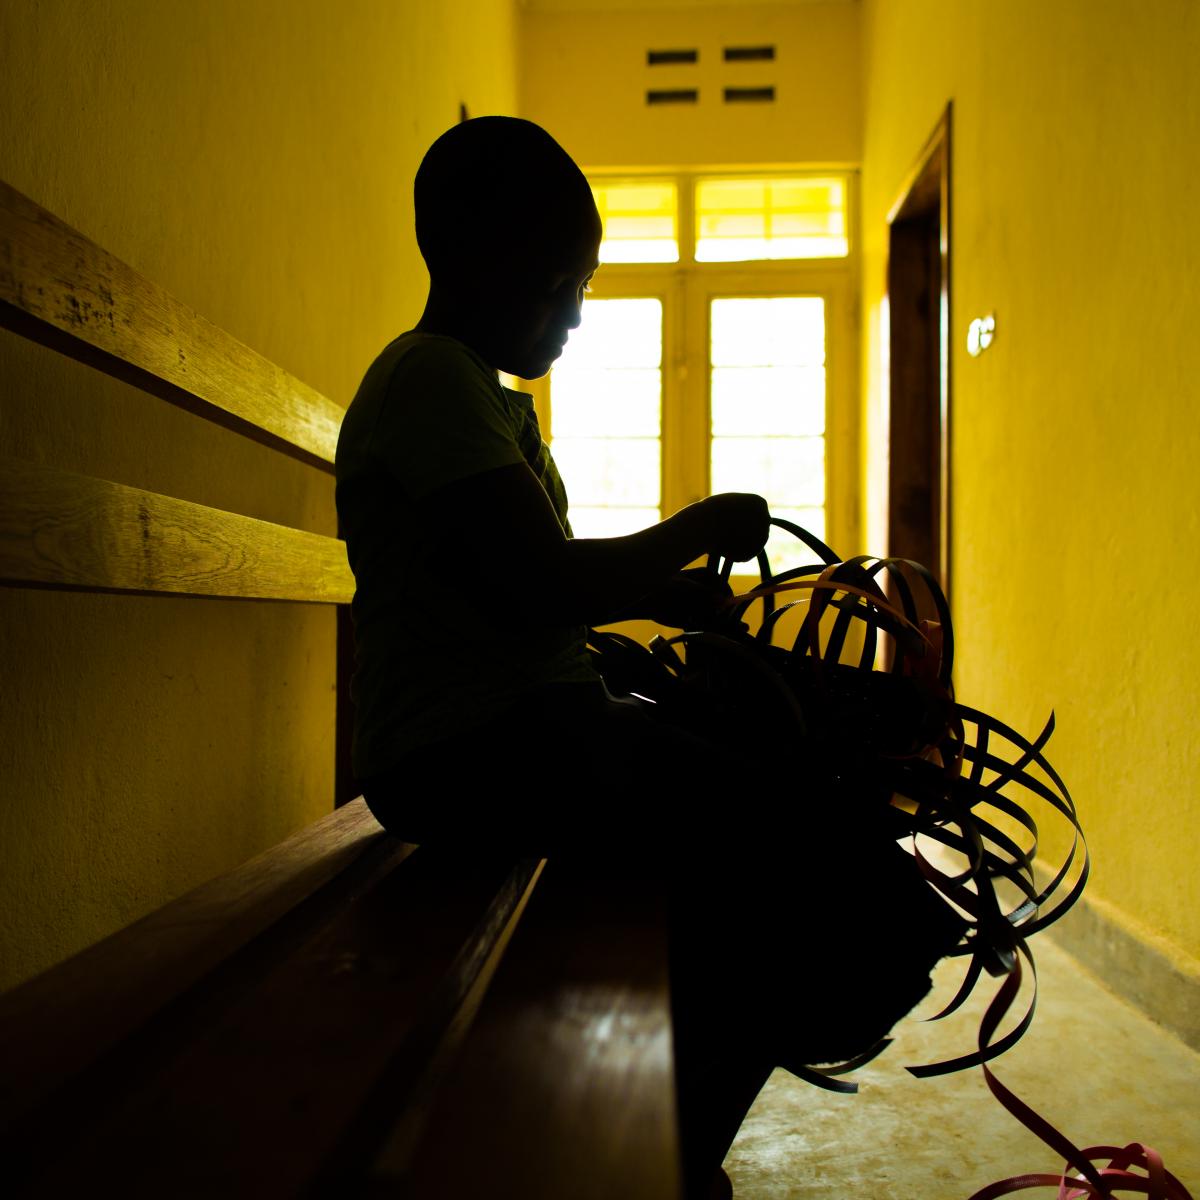 Silhouette of person weaving a basket.